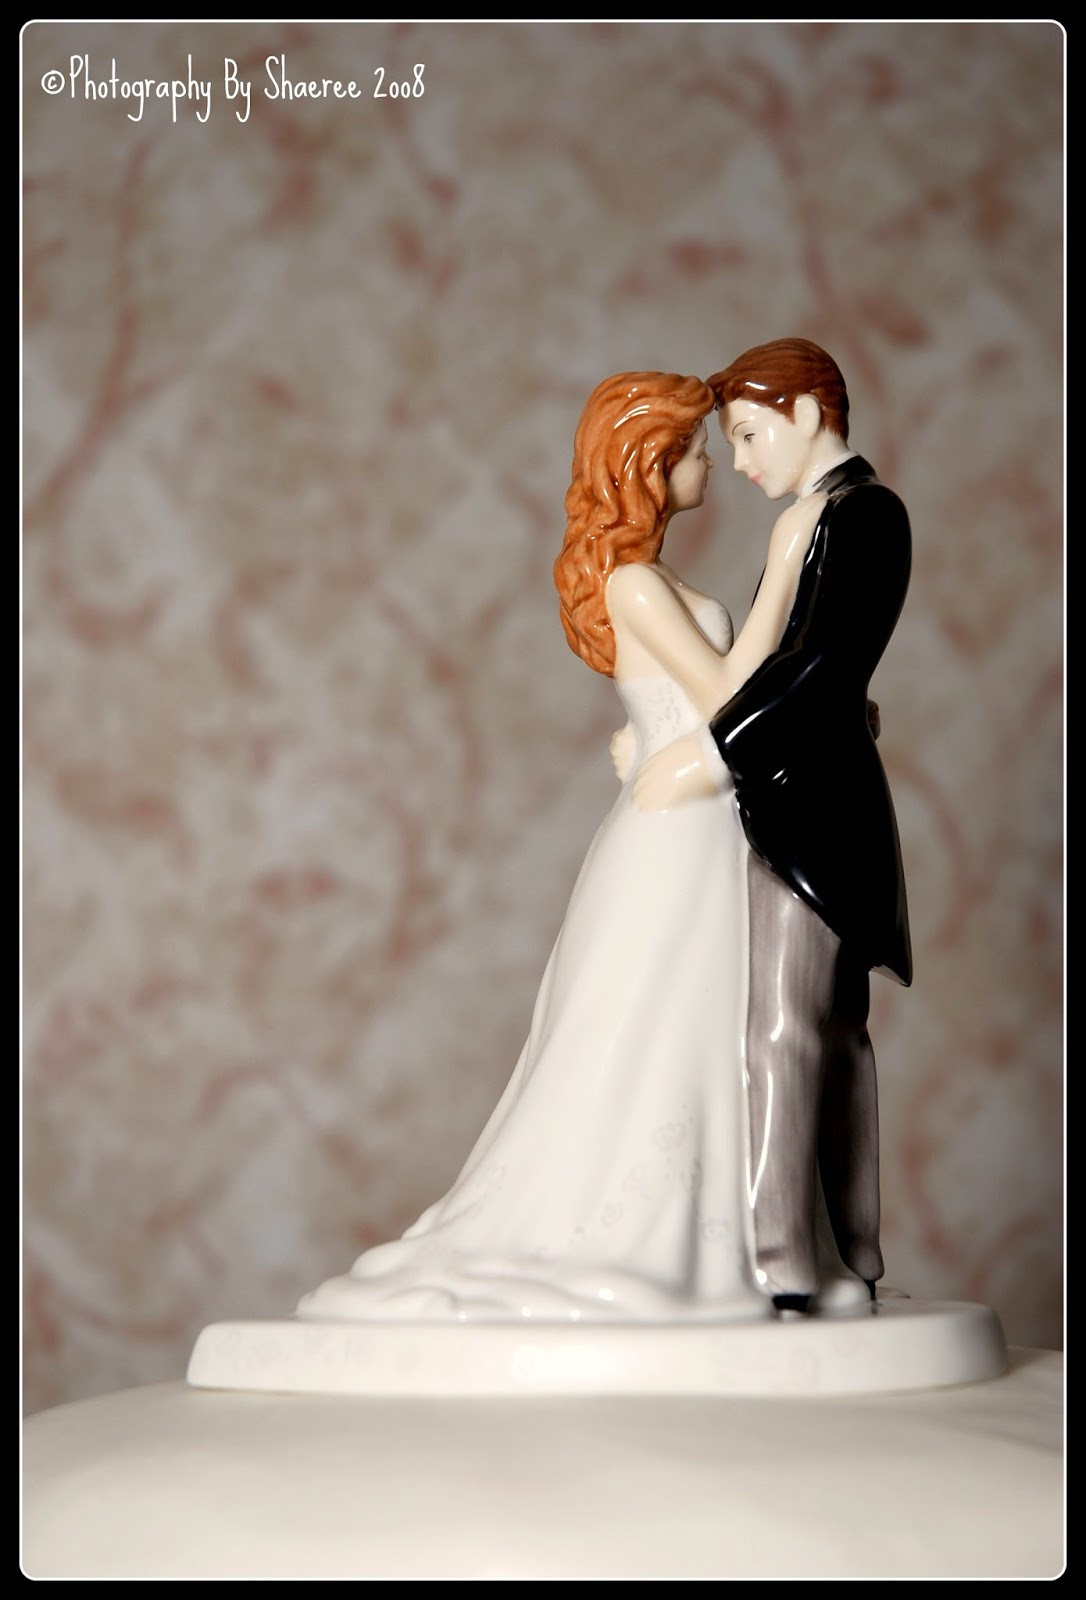 Traditional Wedding Cake Topper
 Traditional wedding cake topper idea in 2017